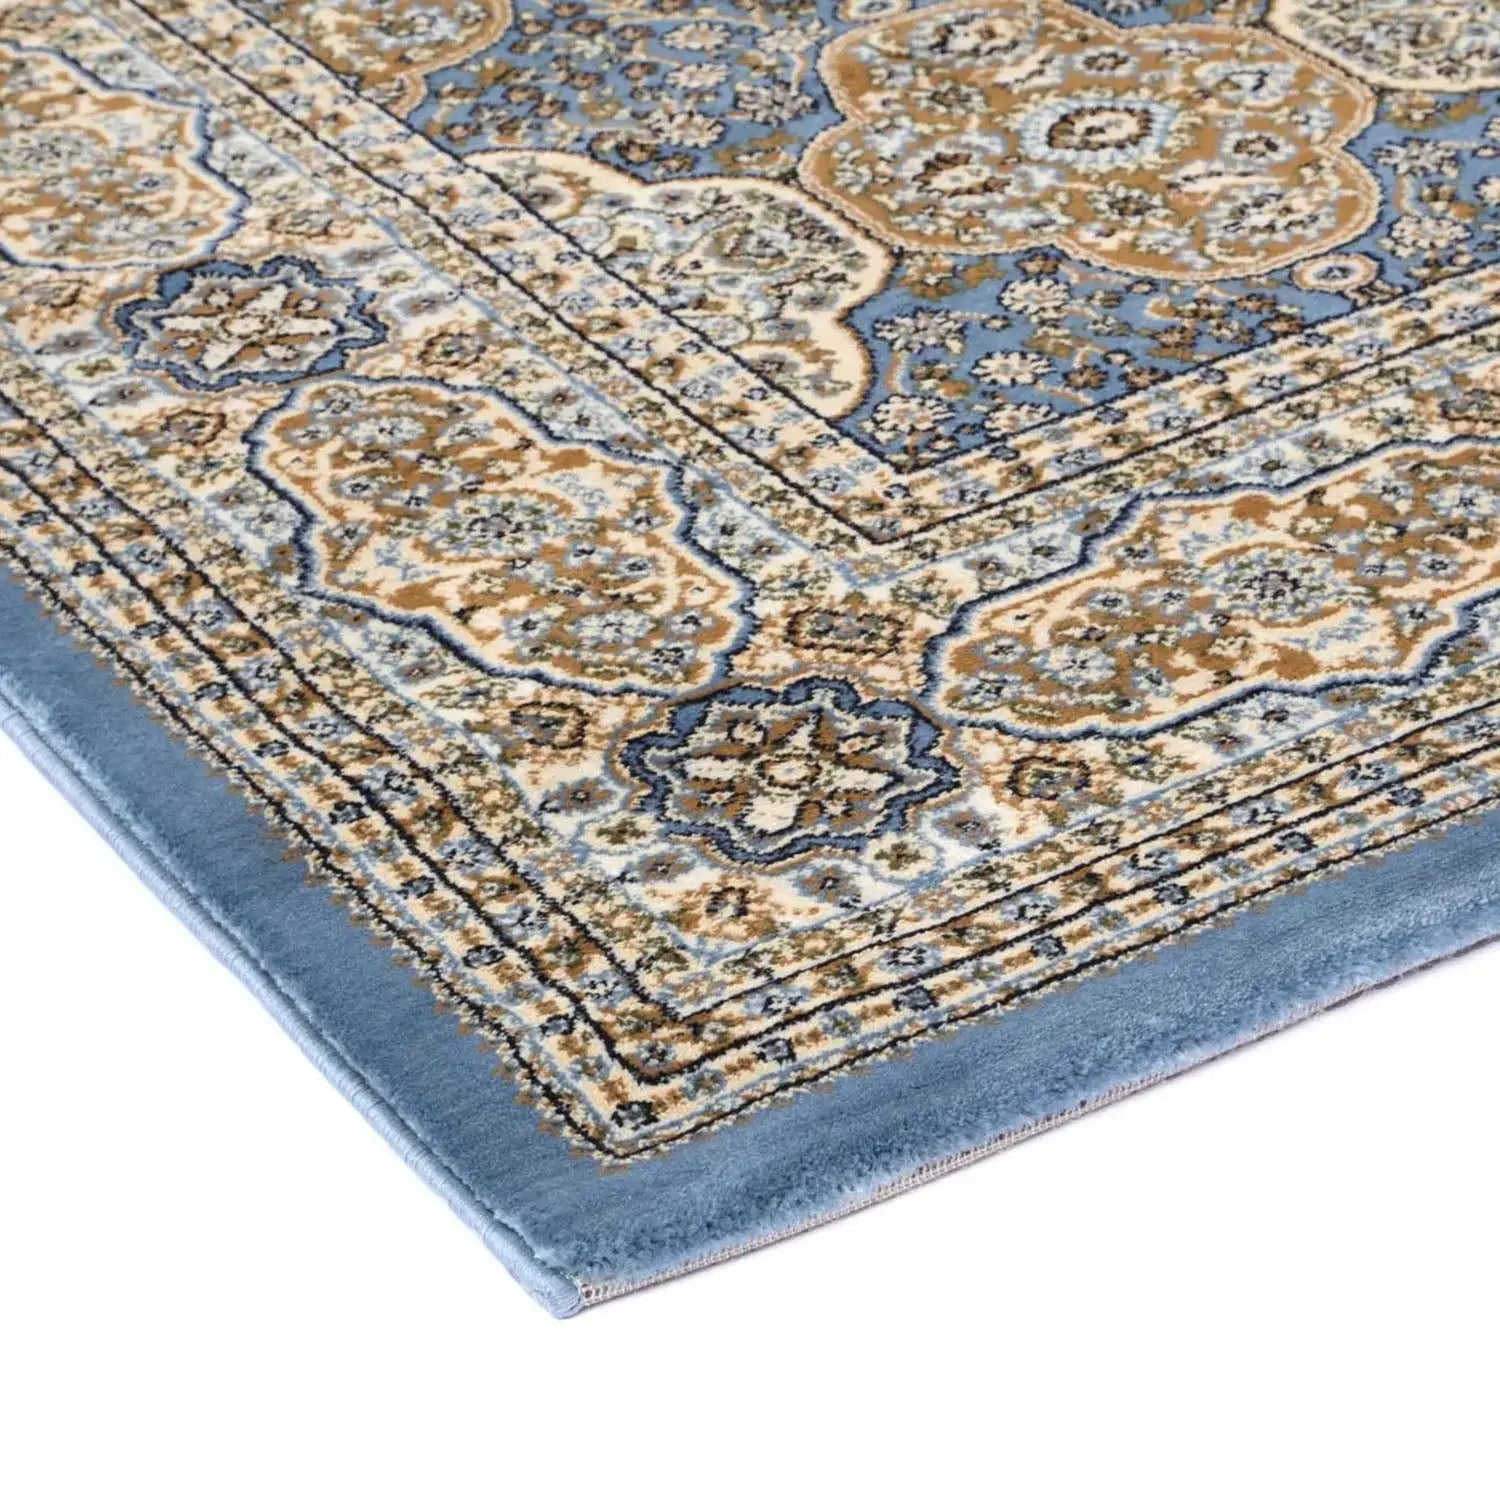 Suzani Sky Blue traditional Rug - Rugs - Rugs a Million